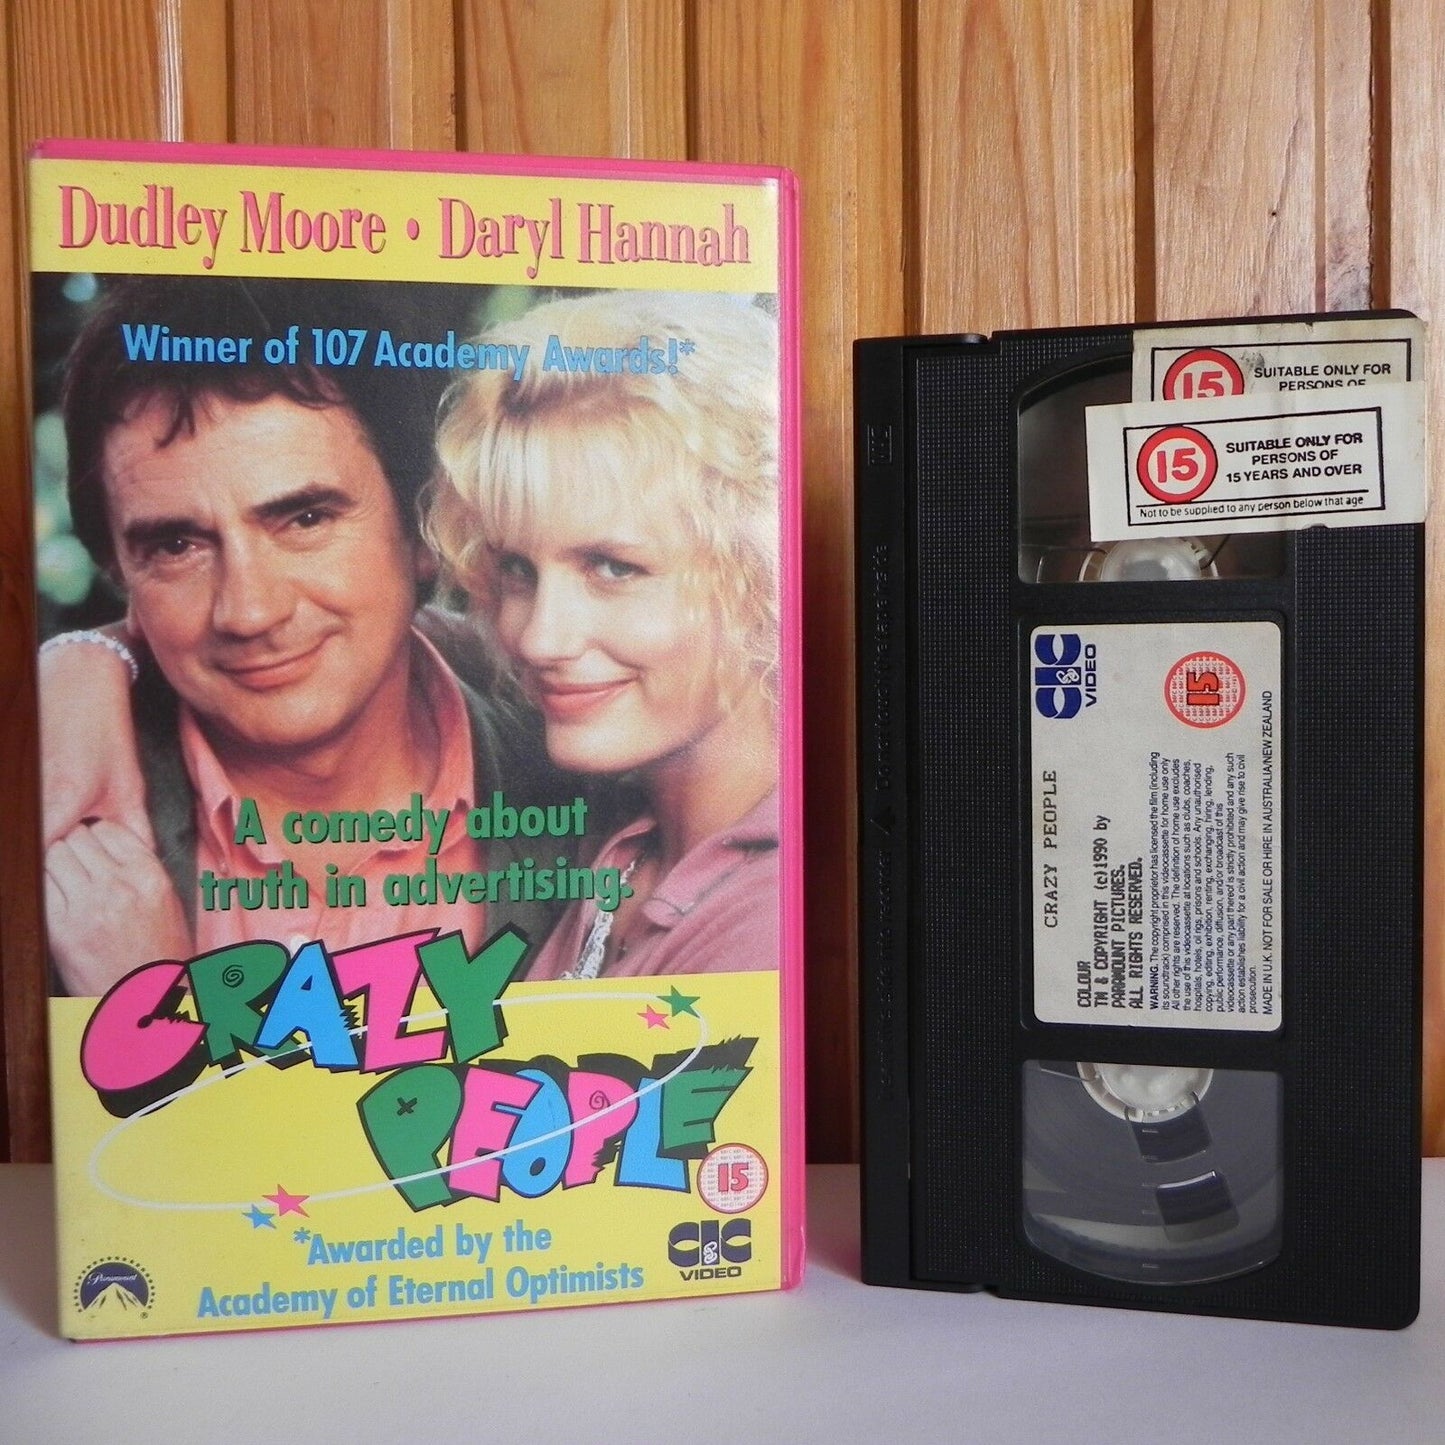 Crazy People - CIC Video - Comedy - Dudley Moore - Daryl Hannah - Big Box - VHS-